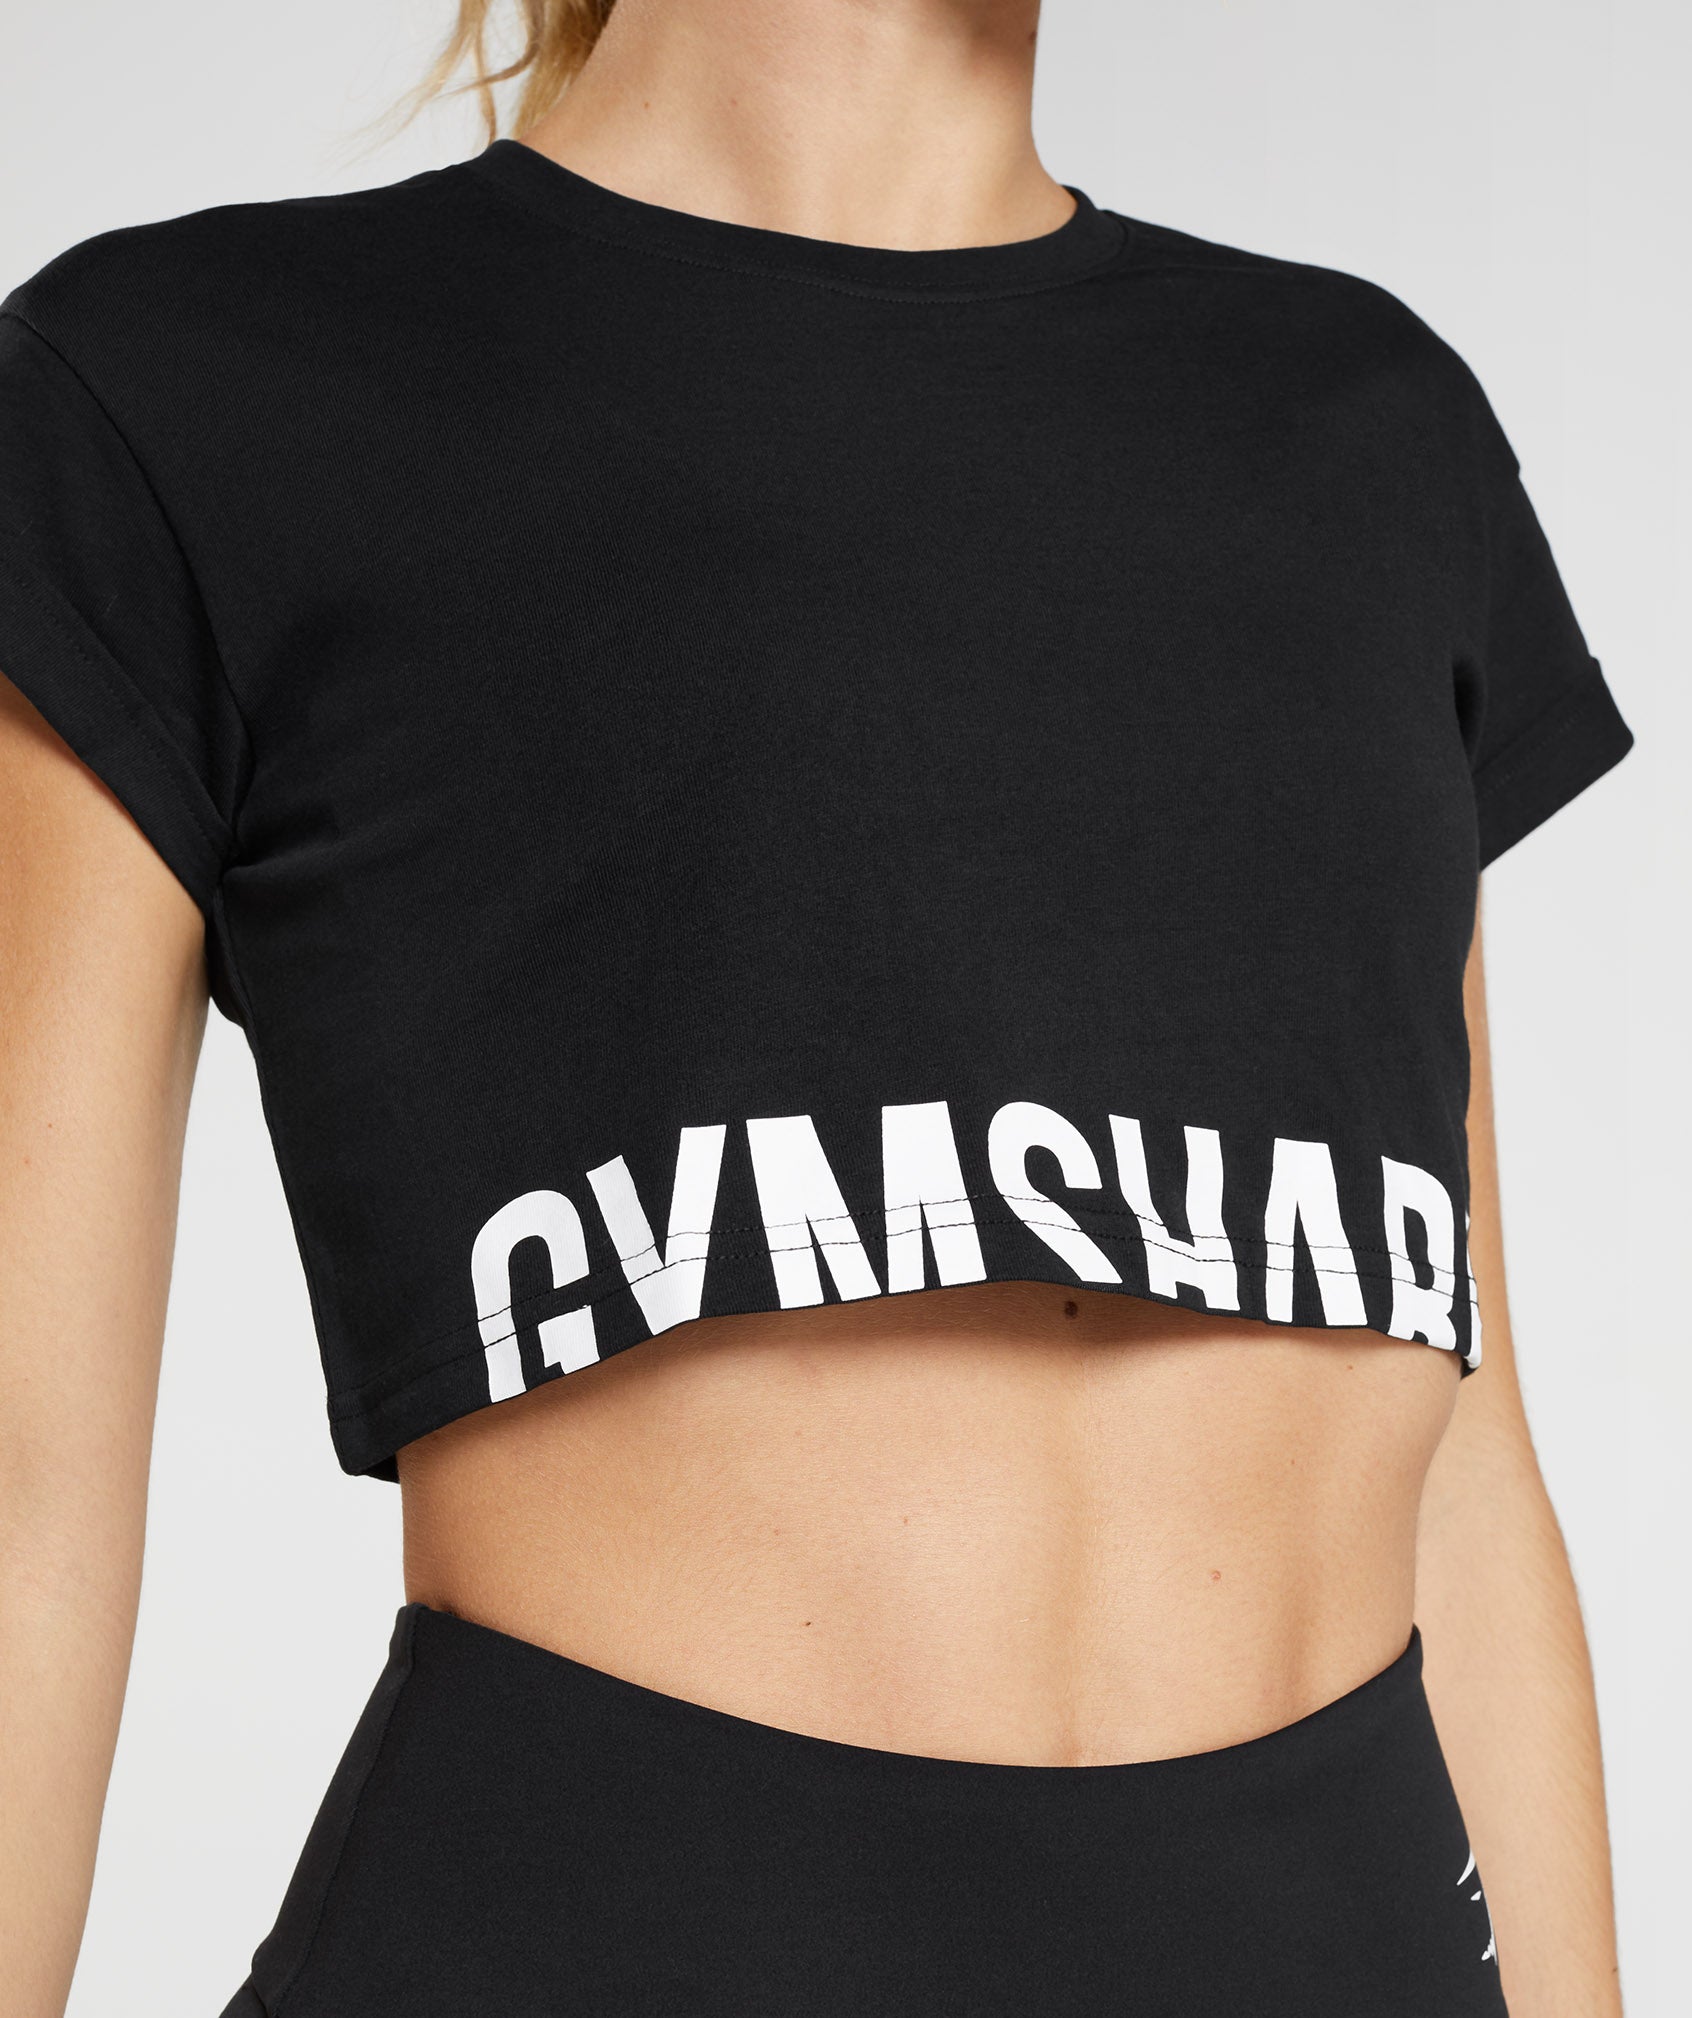 Fraction Crop Top in Black/White - view 3